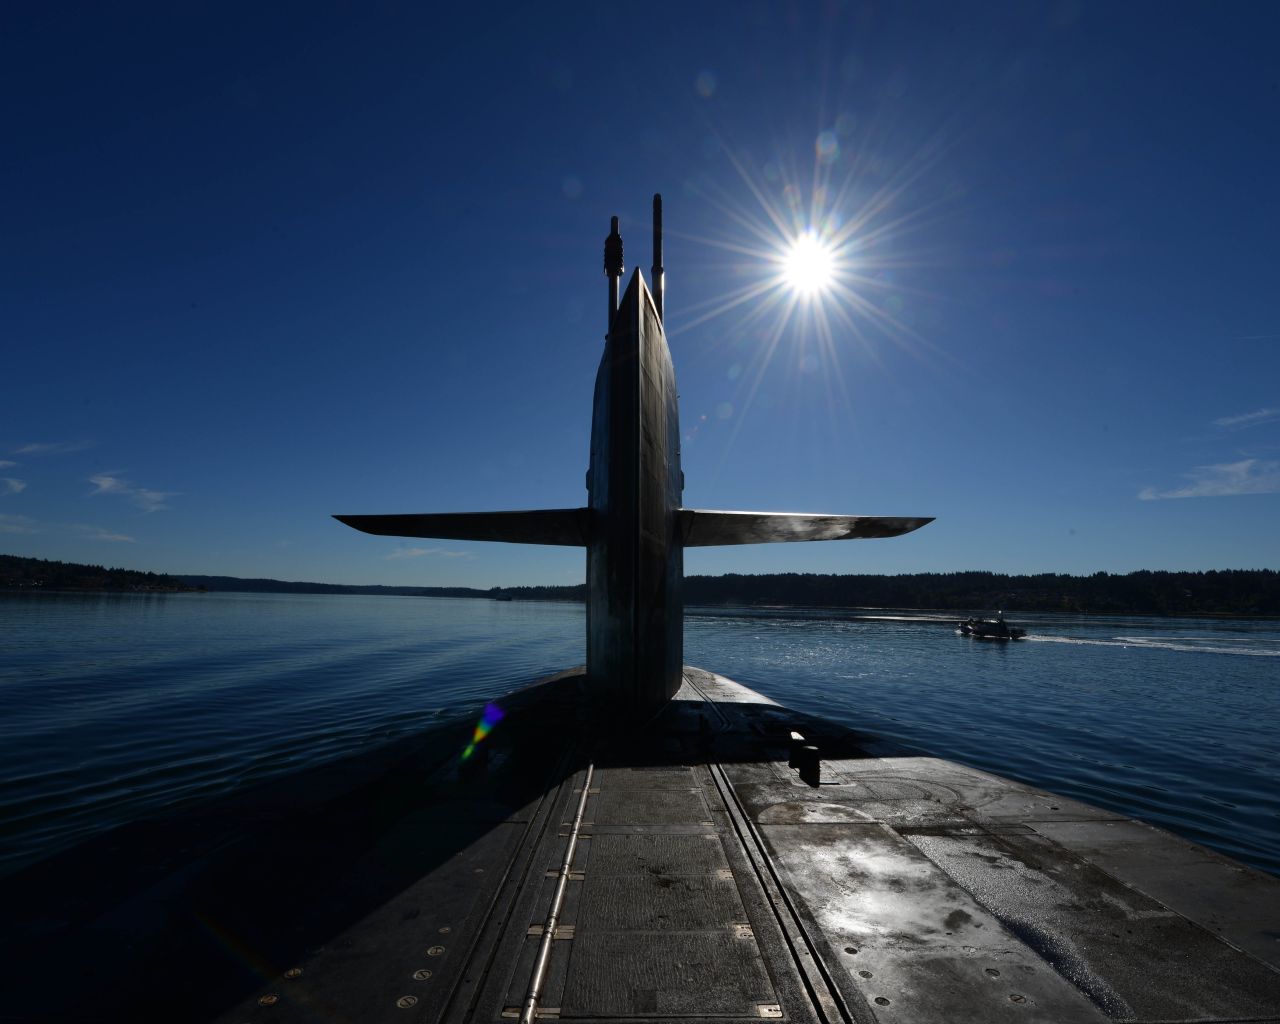 The Ohio-class guided-missile submarine USS Ohio transits Puget Sound, Washington, in June 2015. The Ohio and three other guided-missile subs -- USS Florida, USS Michigan and USS Georgia -- were originally built and deployed as ballistic-missile subs, but were converted to guided-missile platforms beginning in 2002 after the Navy concluded it had a surplus of the boomers.